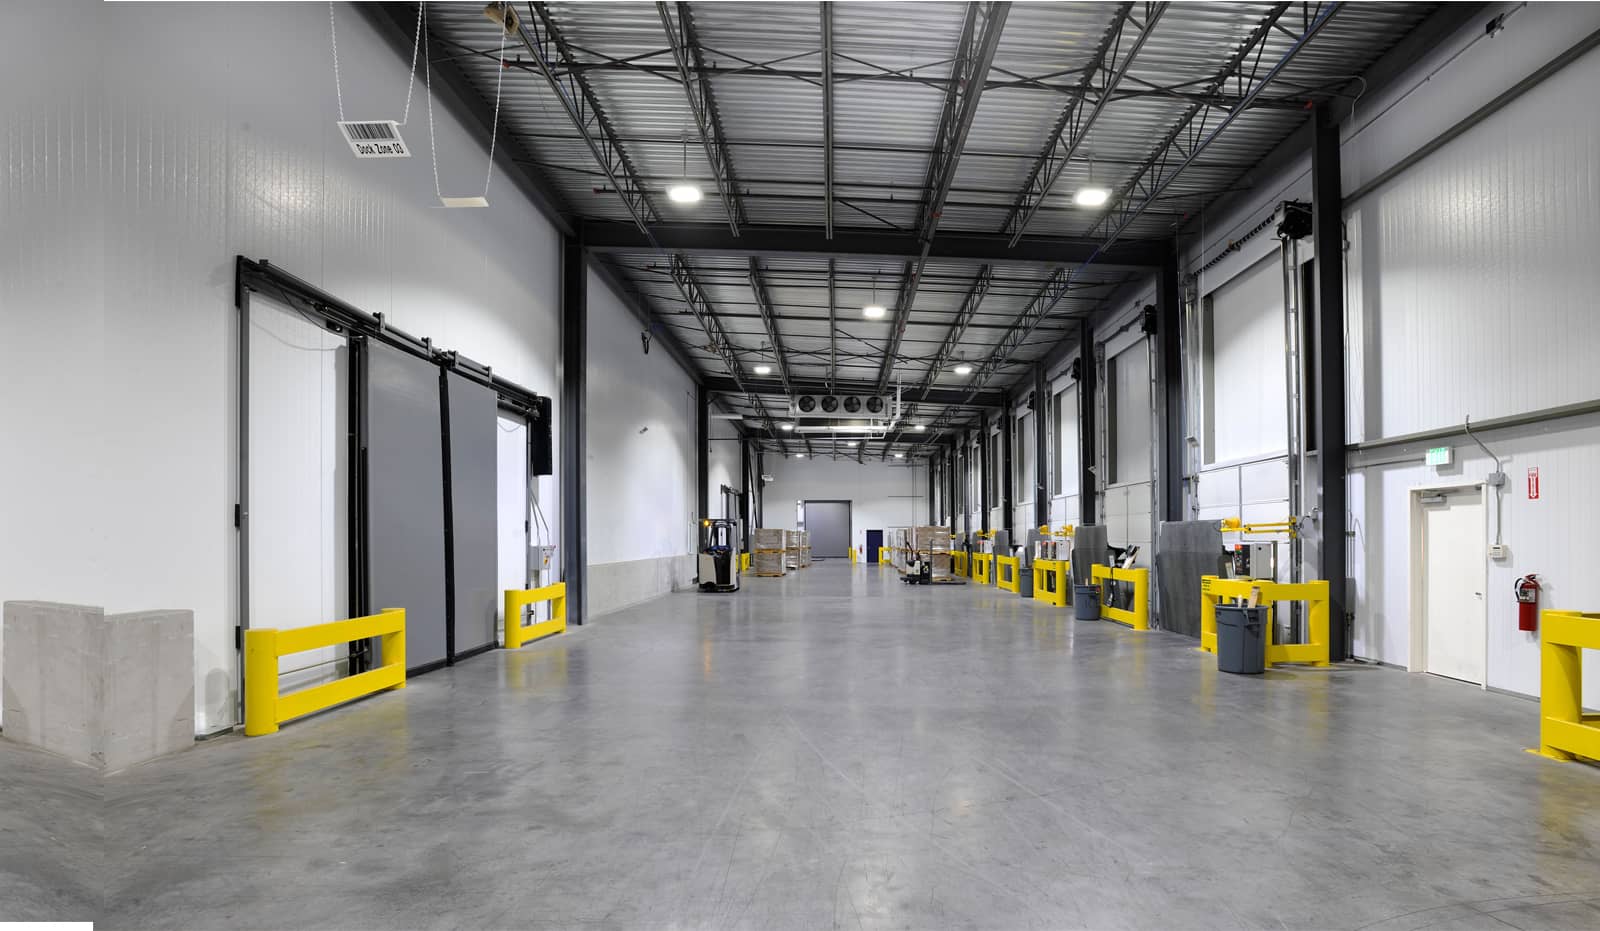 Warehouse lighting installed by Constellation Lighting